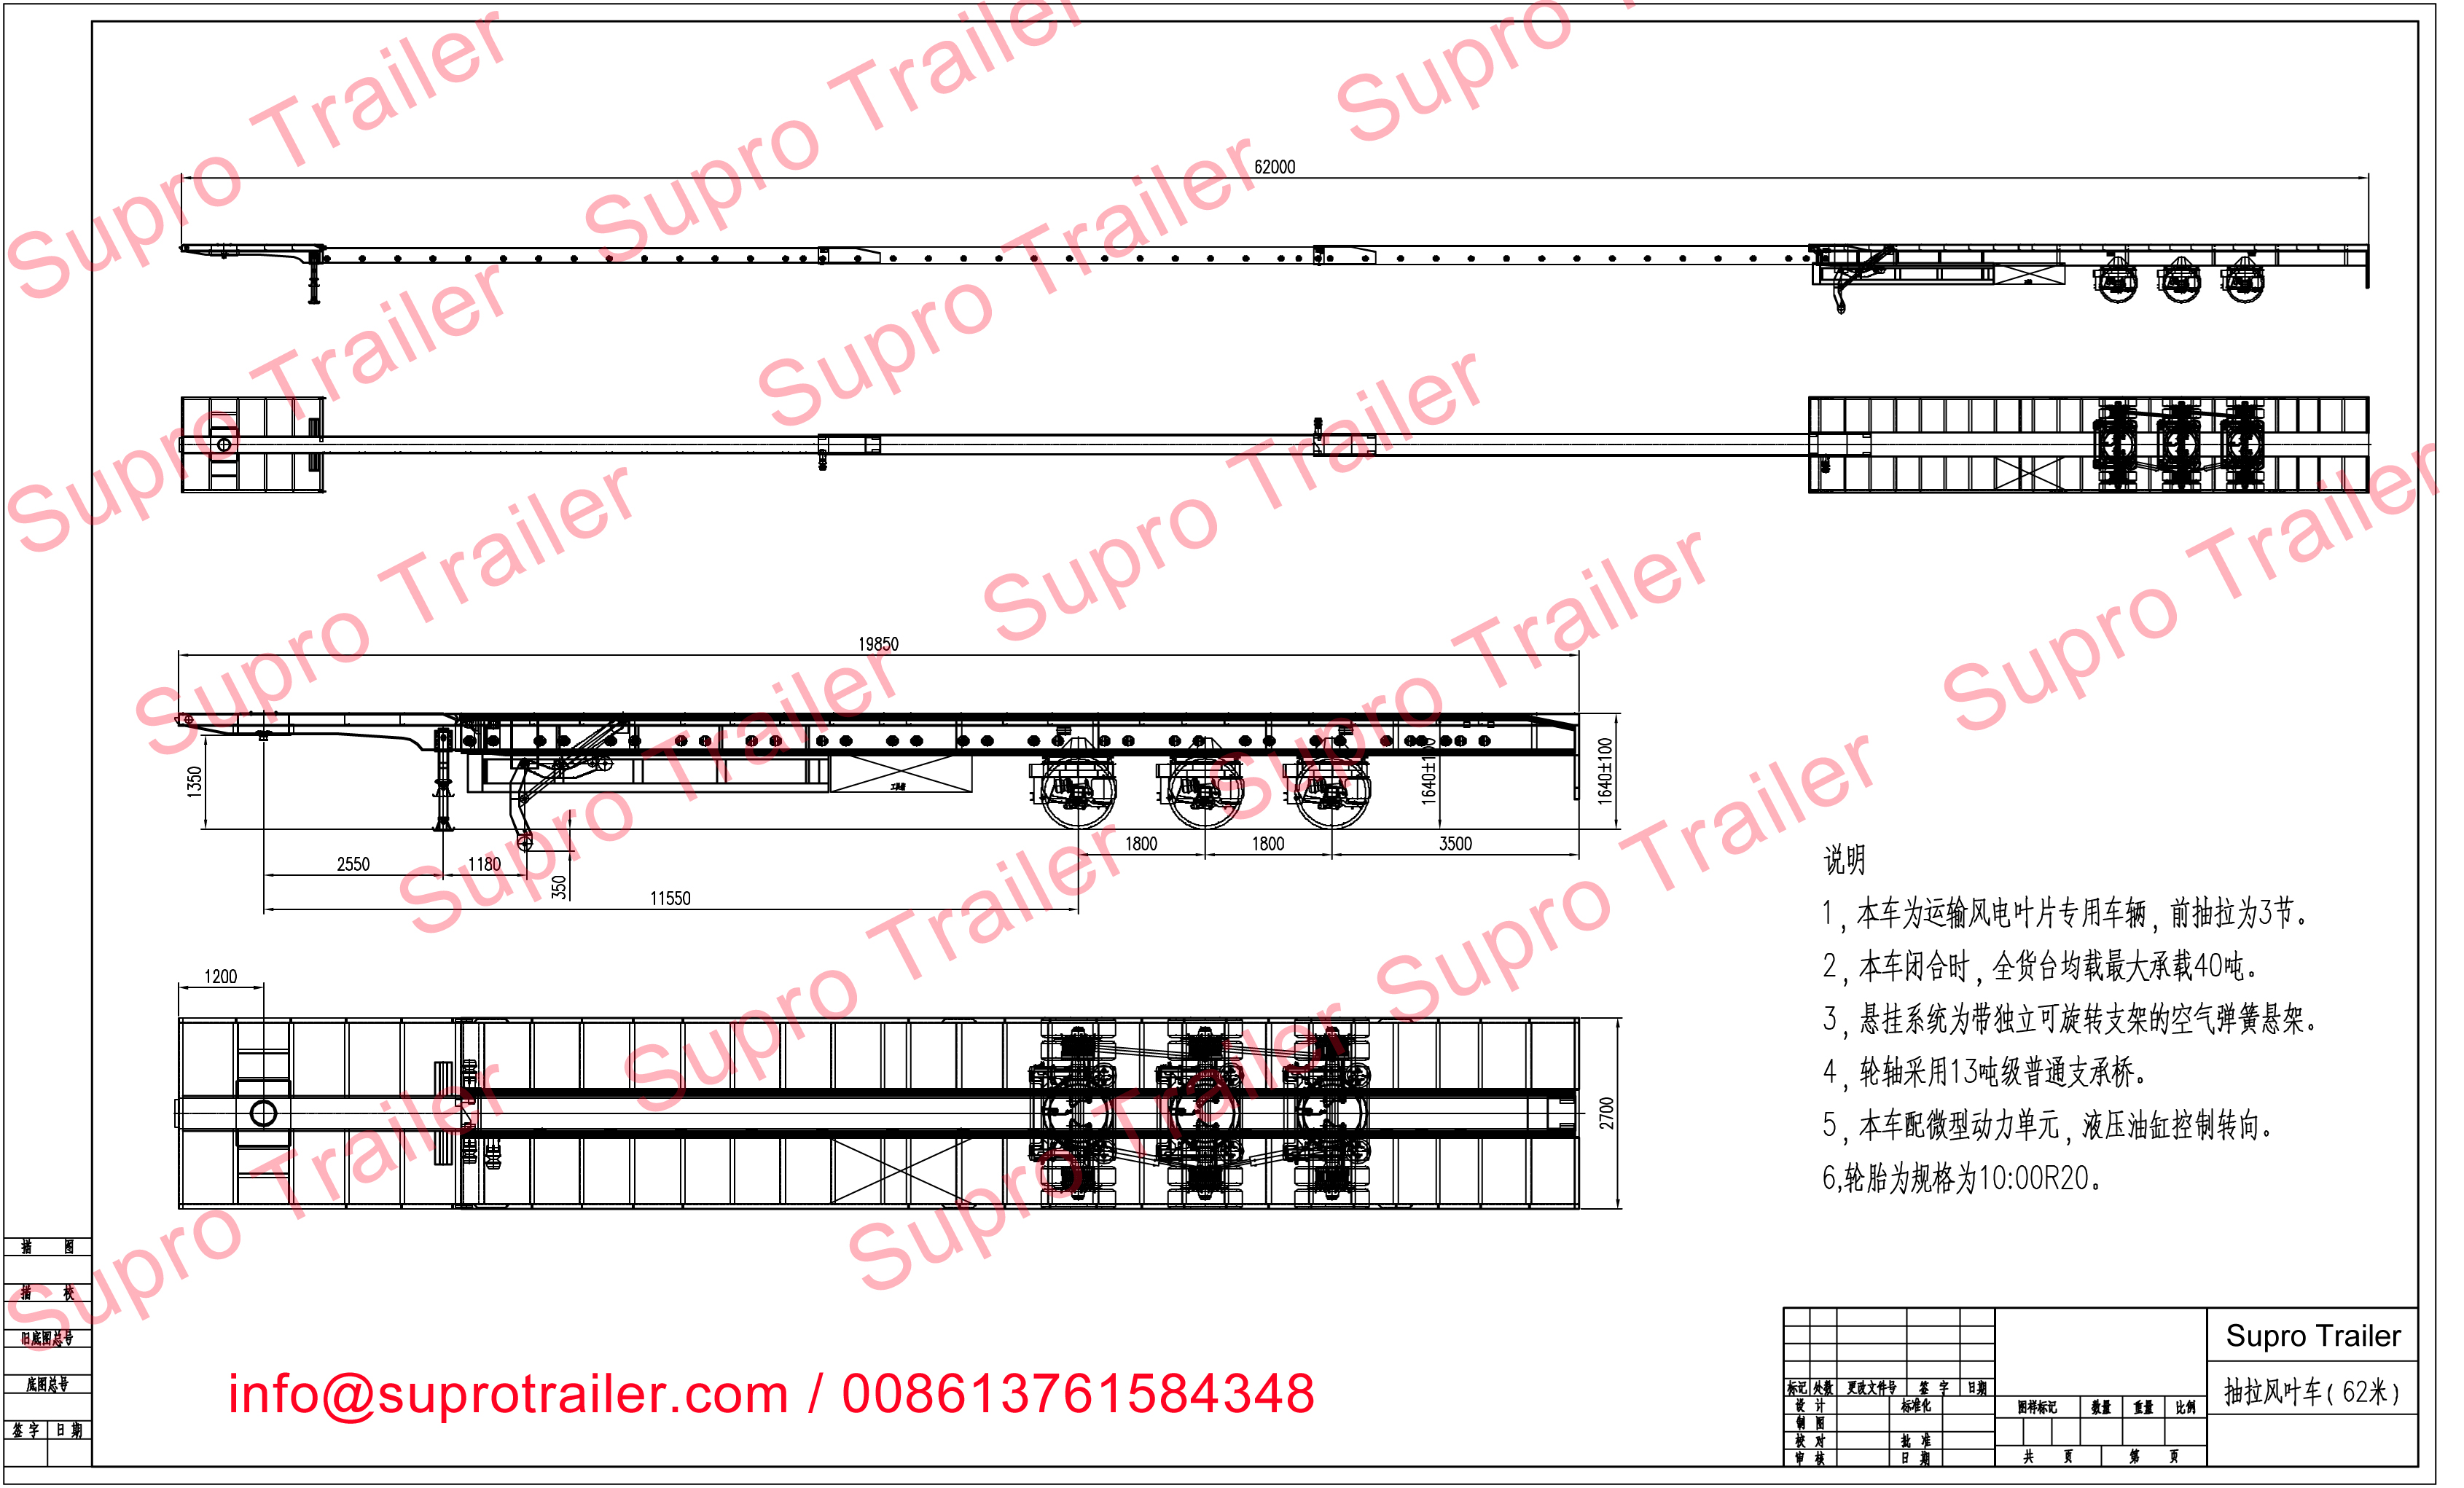 62m length extendable trailer drawing